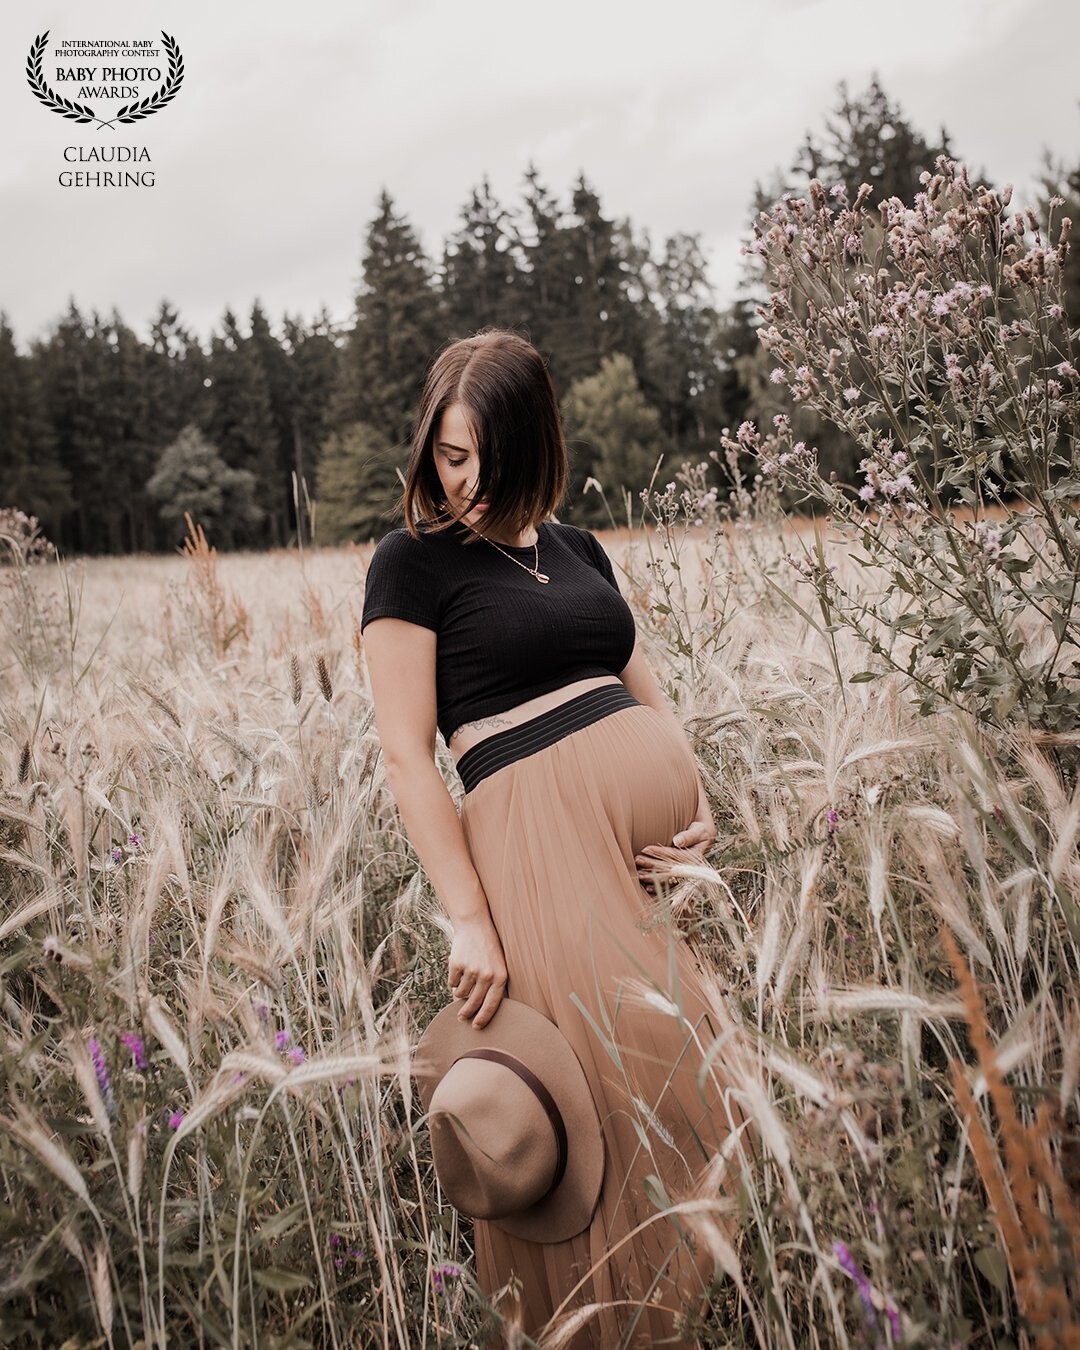 Thank you for this award! I especially like outdoor pregnancy shoots. I already miss the cornfields. She is a beautiful mom to be.